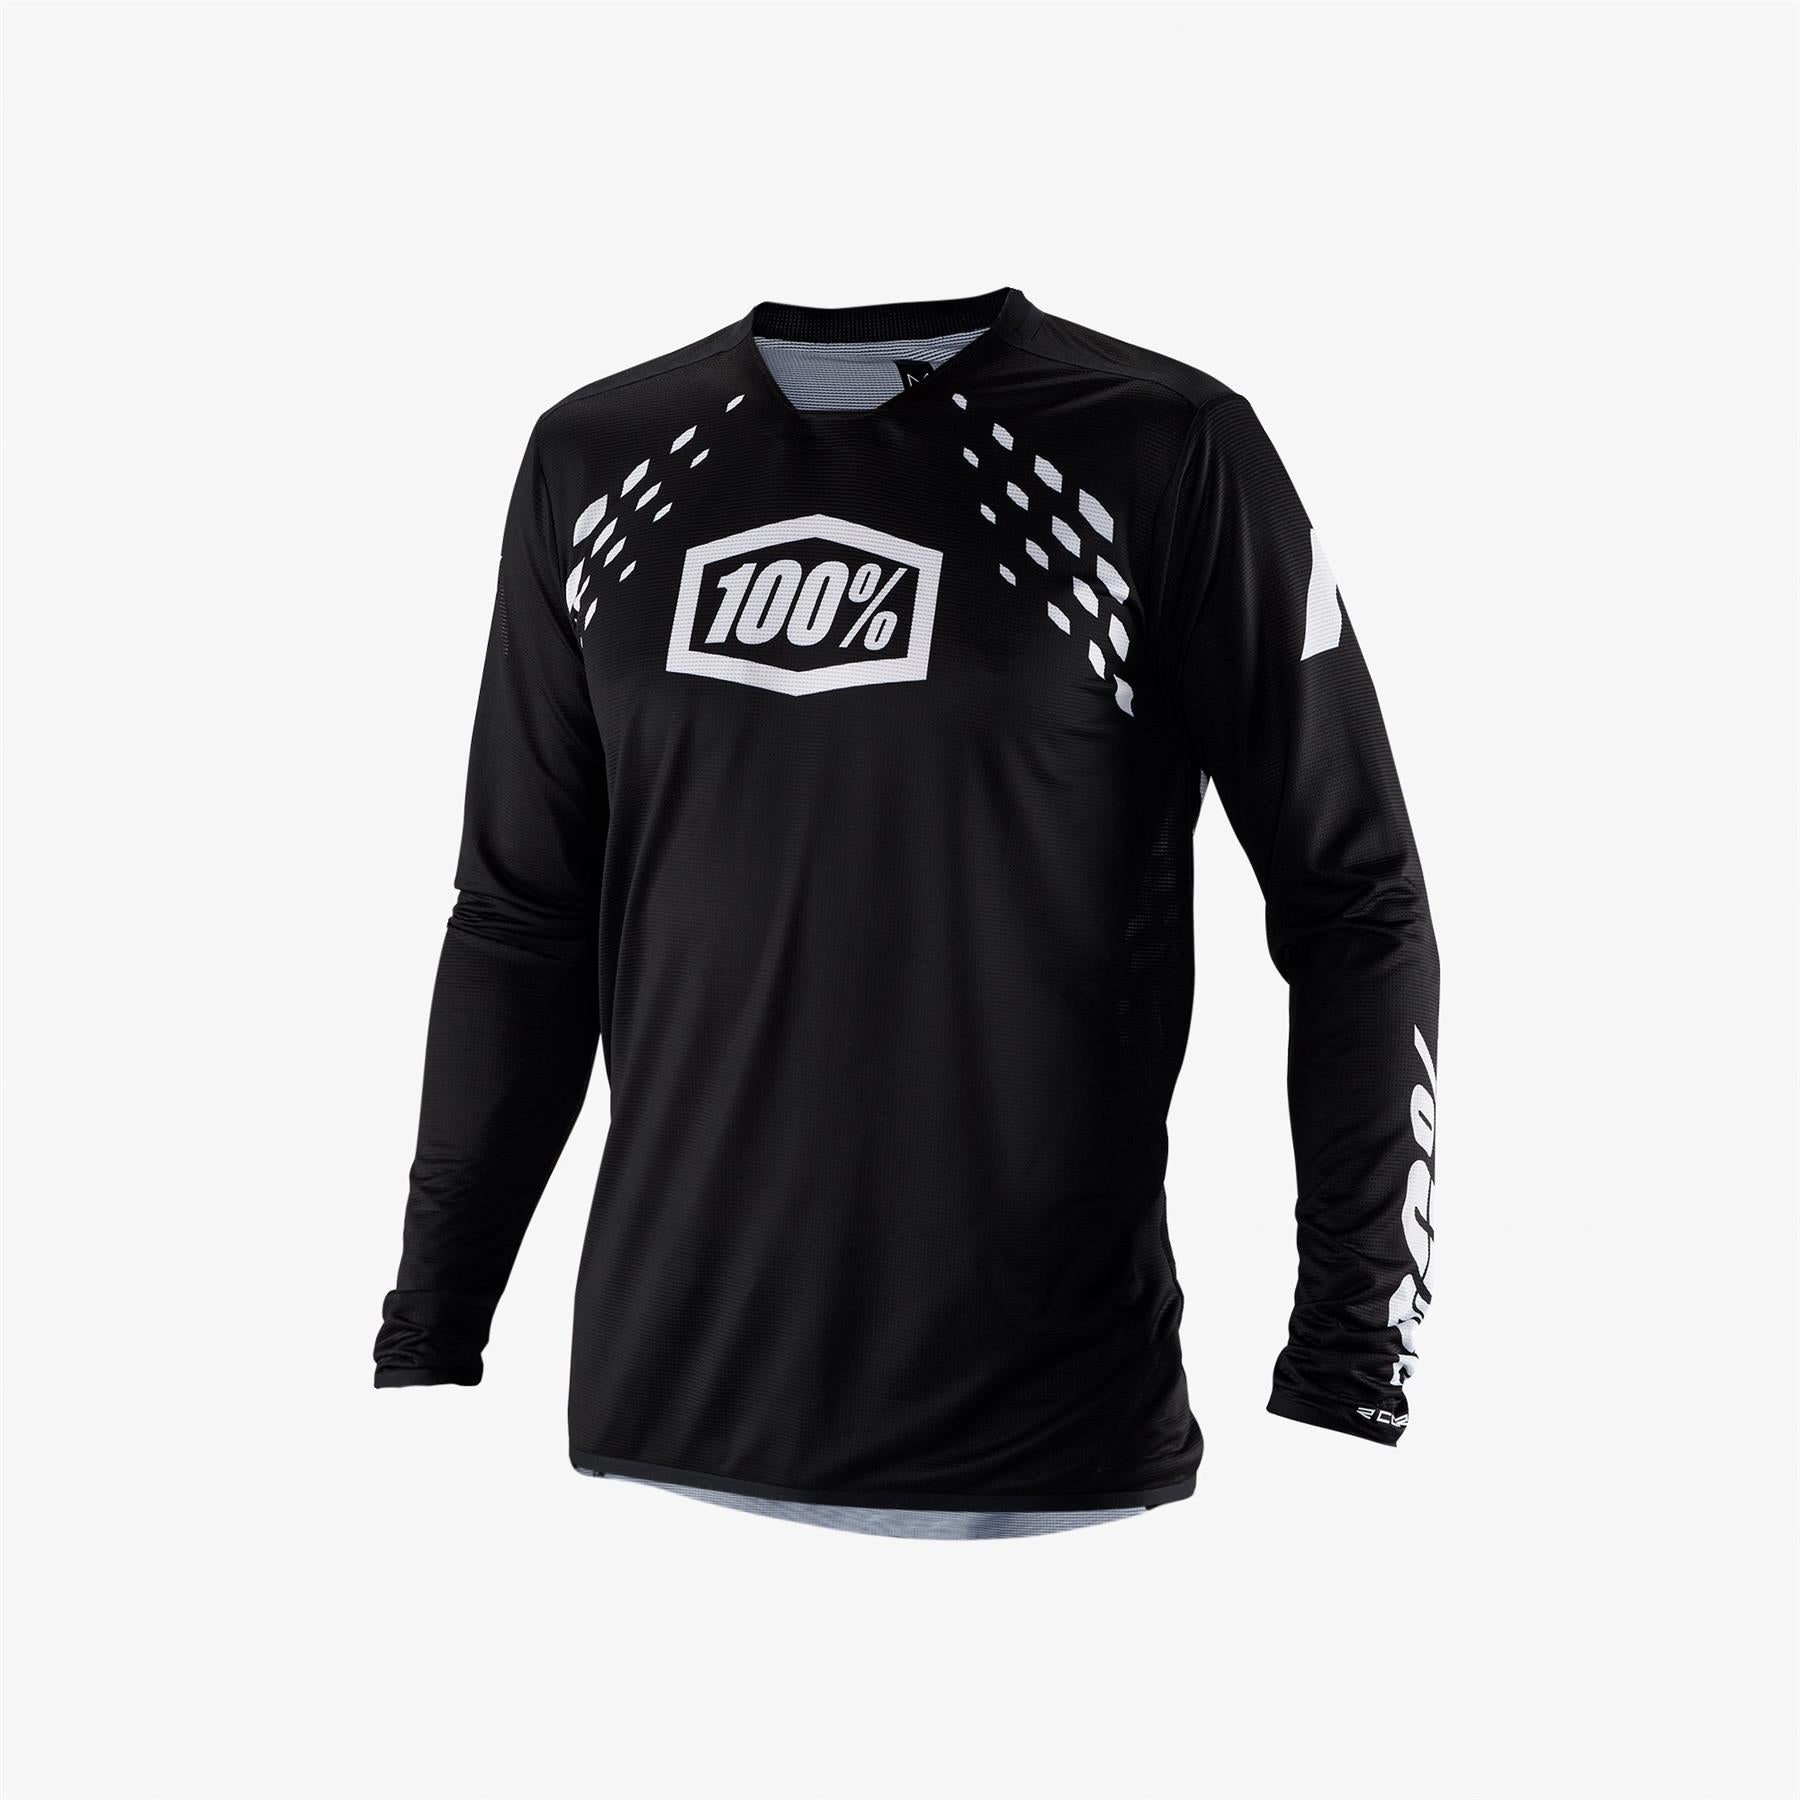 An image of 100% R-Core X Race Jersey - Black/White Large Race Tops